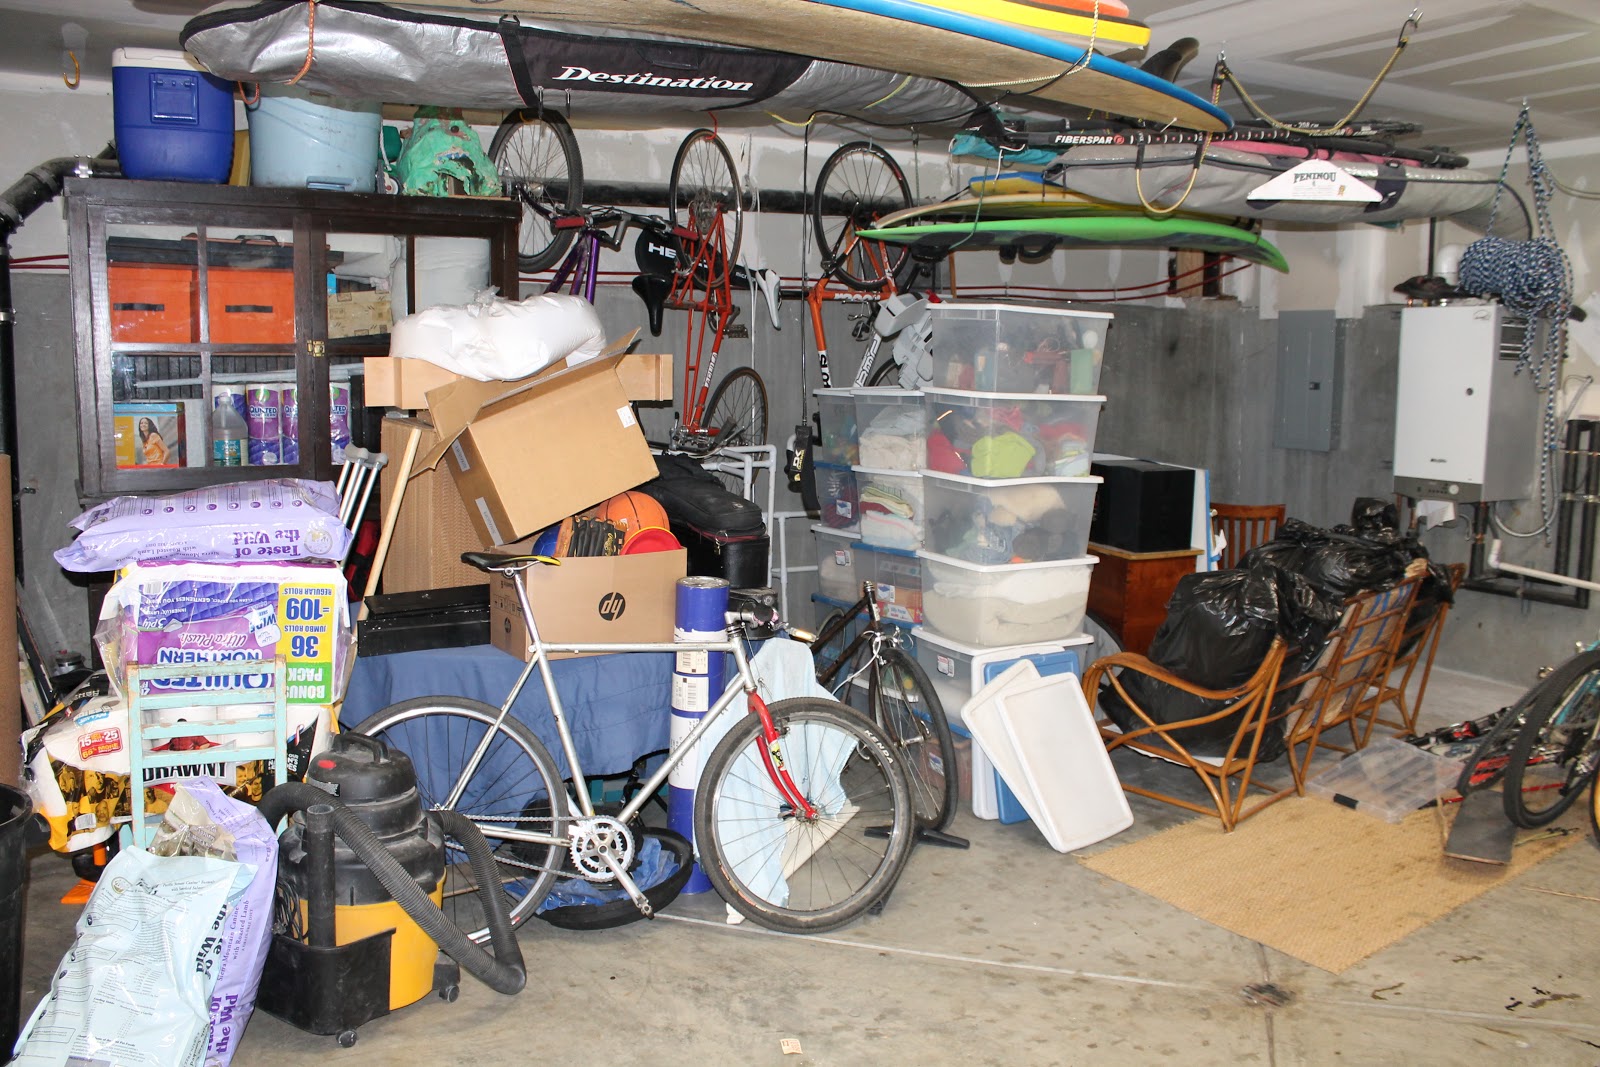 cluttered garage space